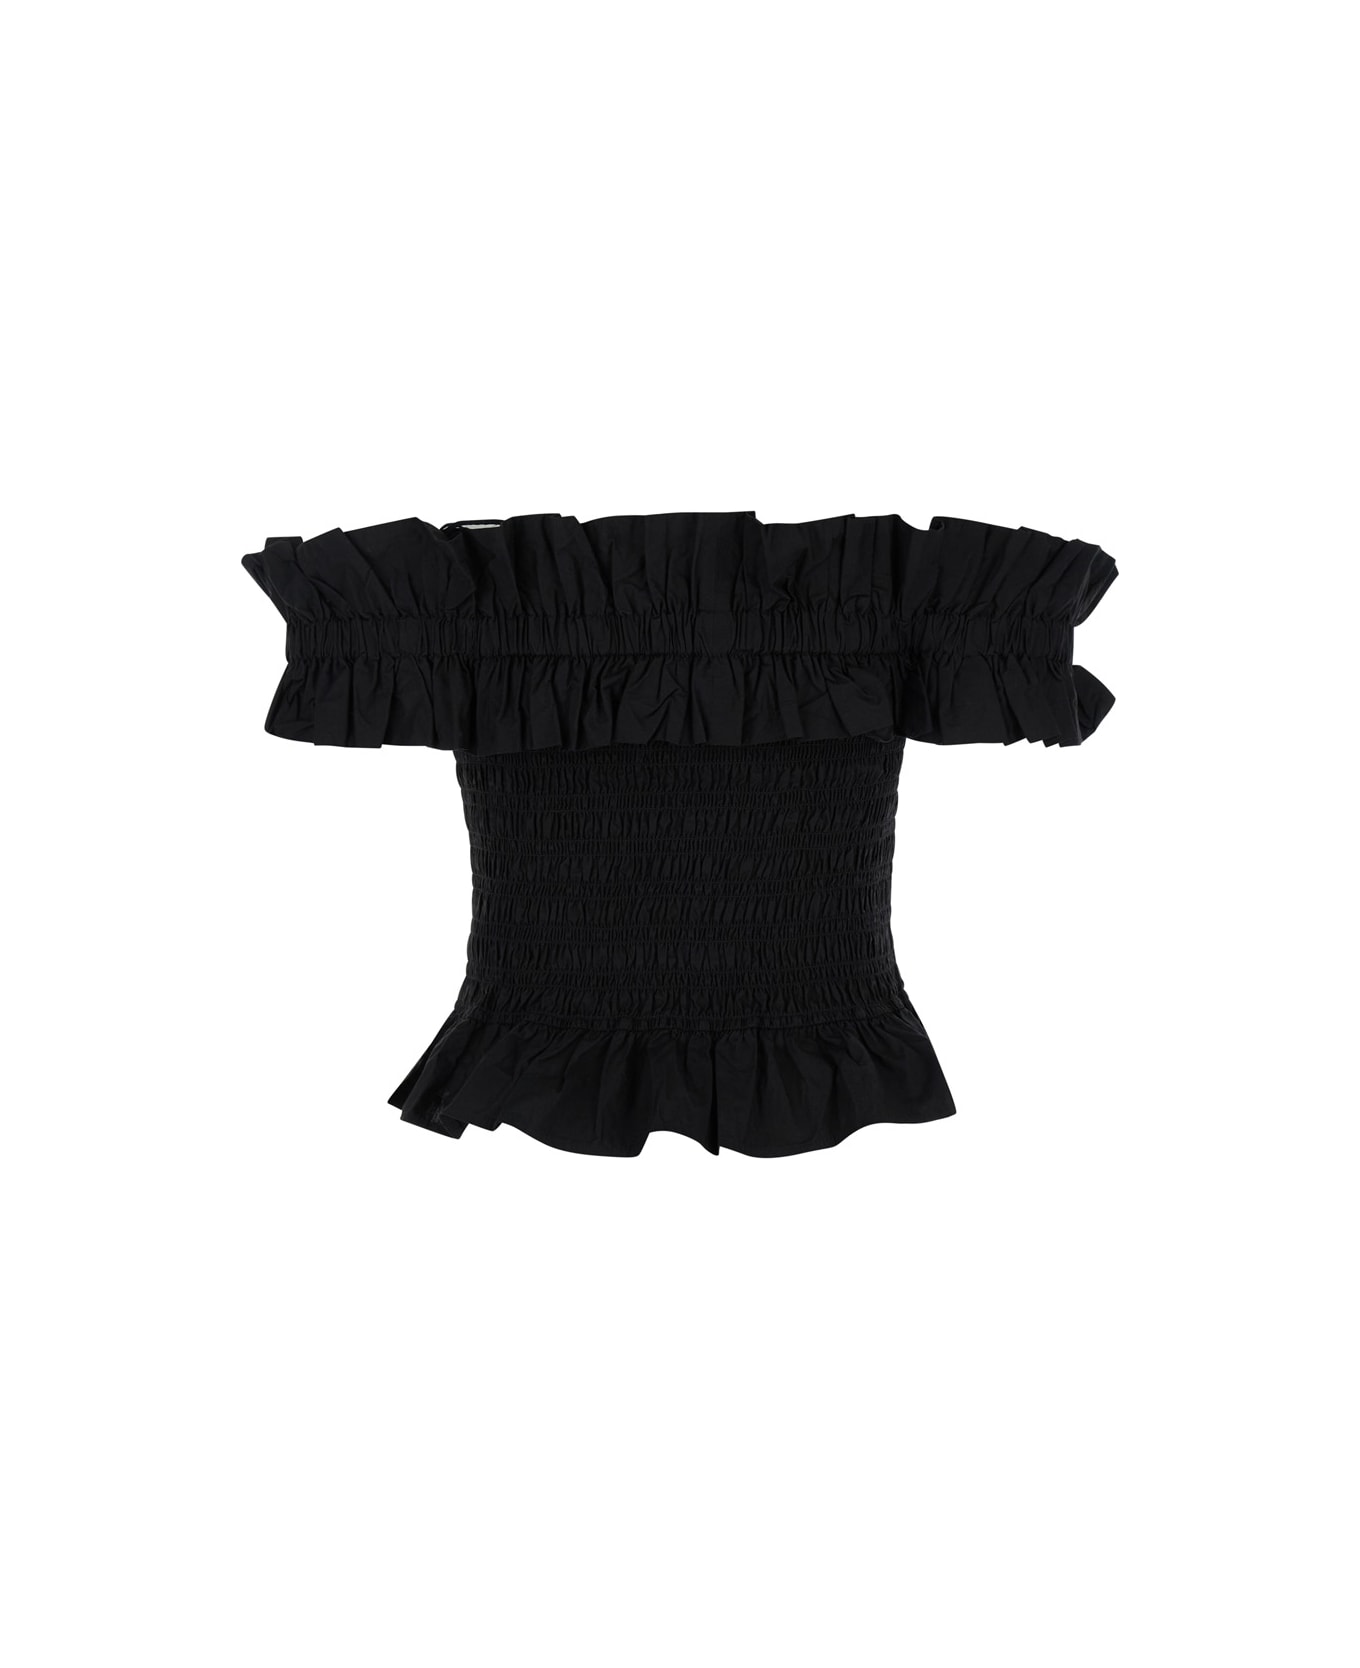 Ganni Top With Bare Shoulders - Black トップス